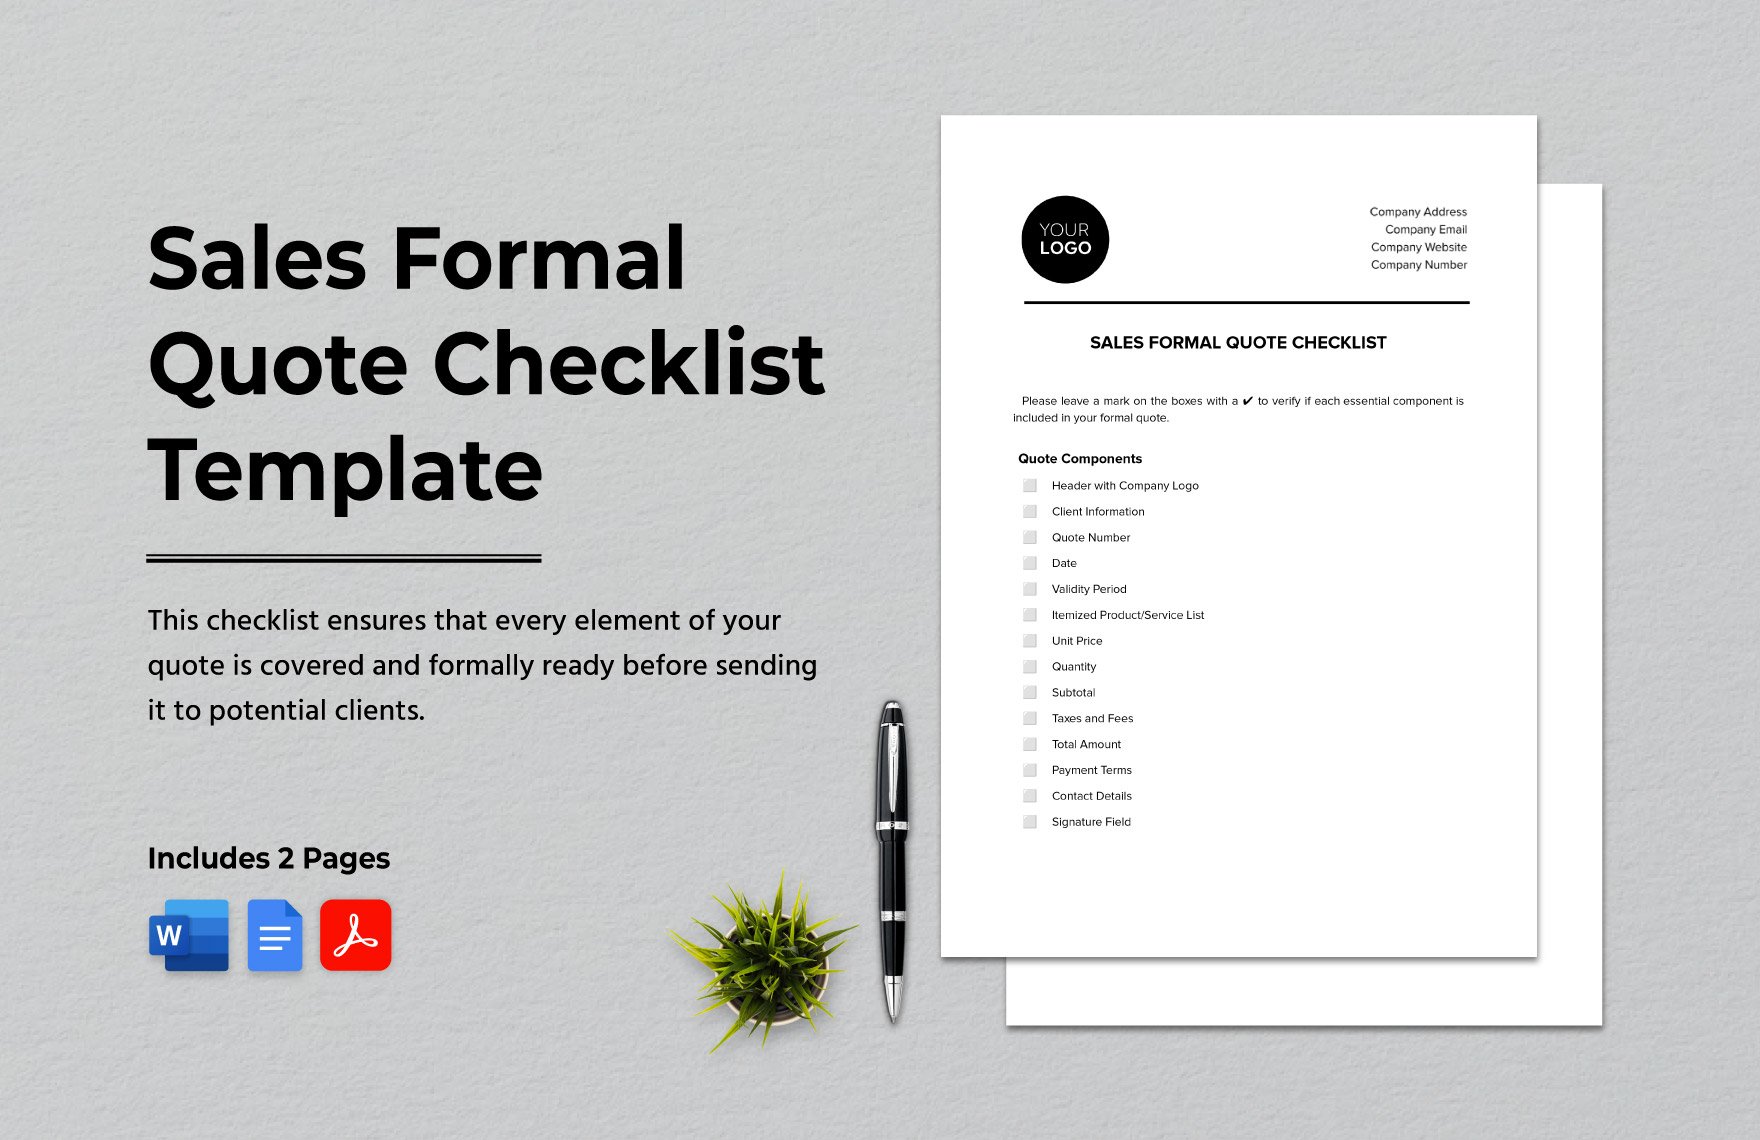 Sales Formal Quote Checklist Template in Word, Google Docs, PDF